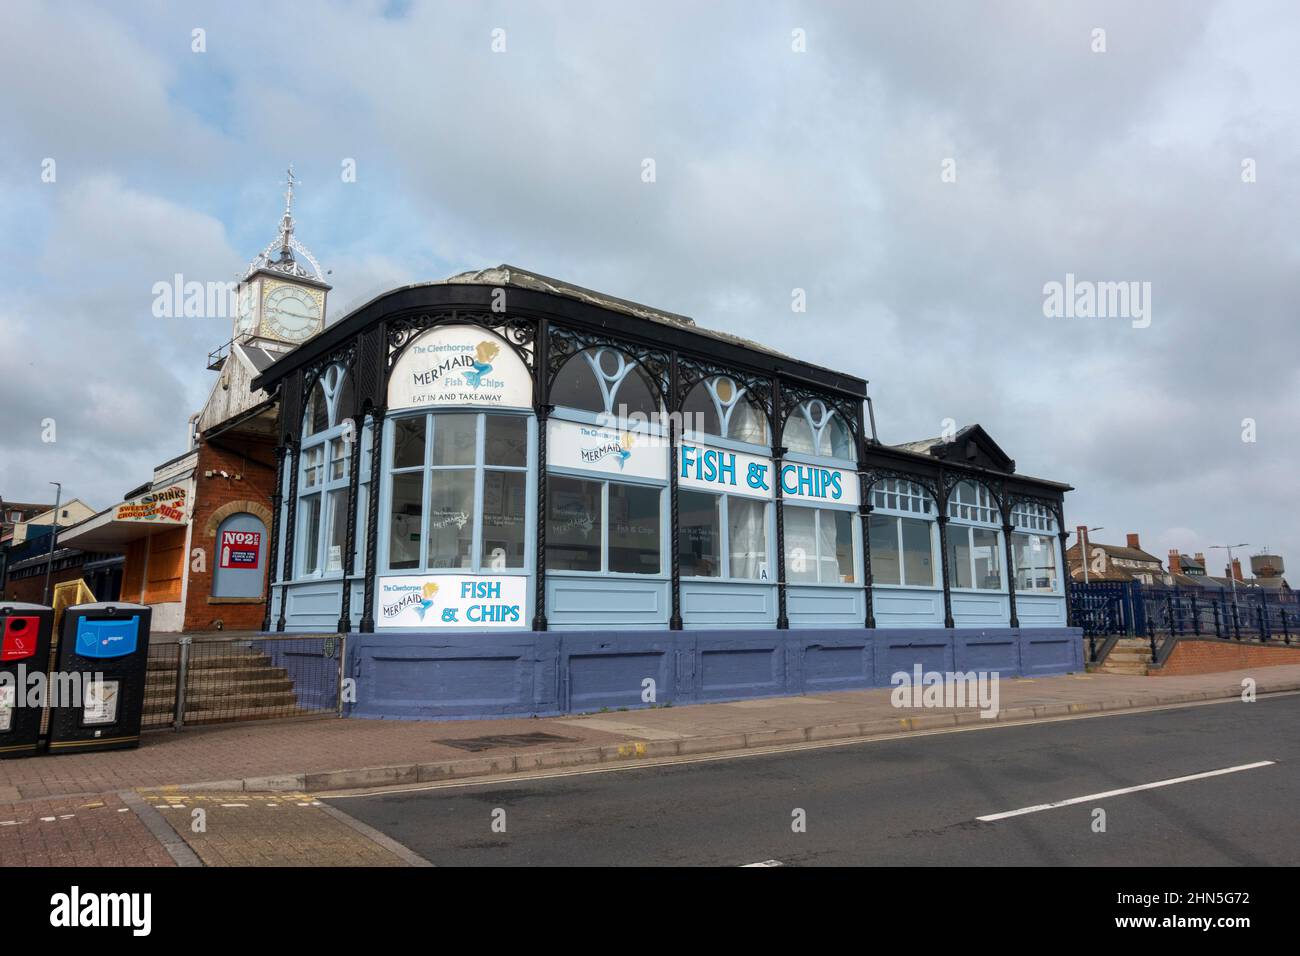 The Cleethorpes Mermaid fish and chips shop on the seafront at Cleethorpes, Humber Estuary, North East Lincolnshire, UK. Stock Photo